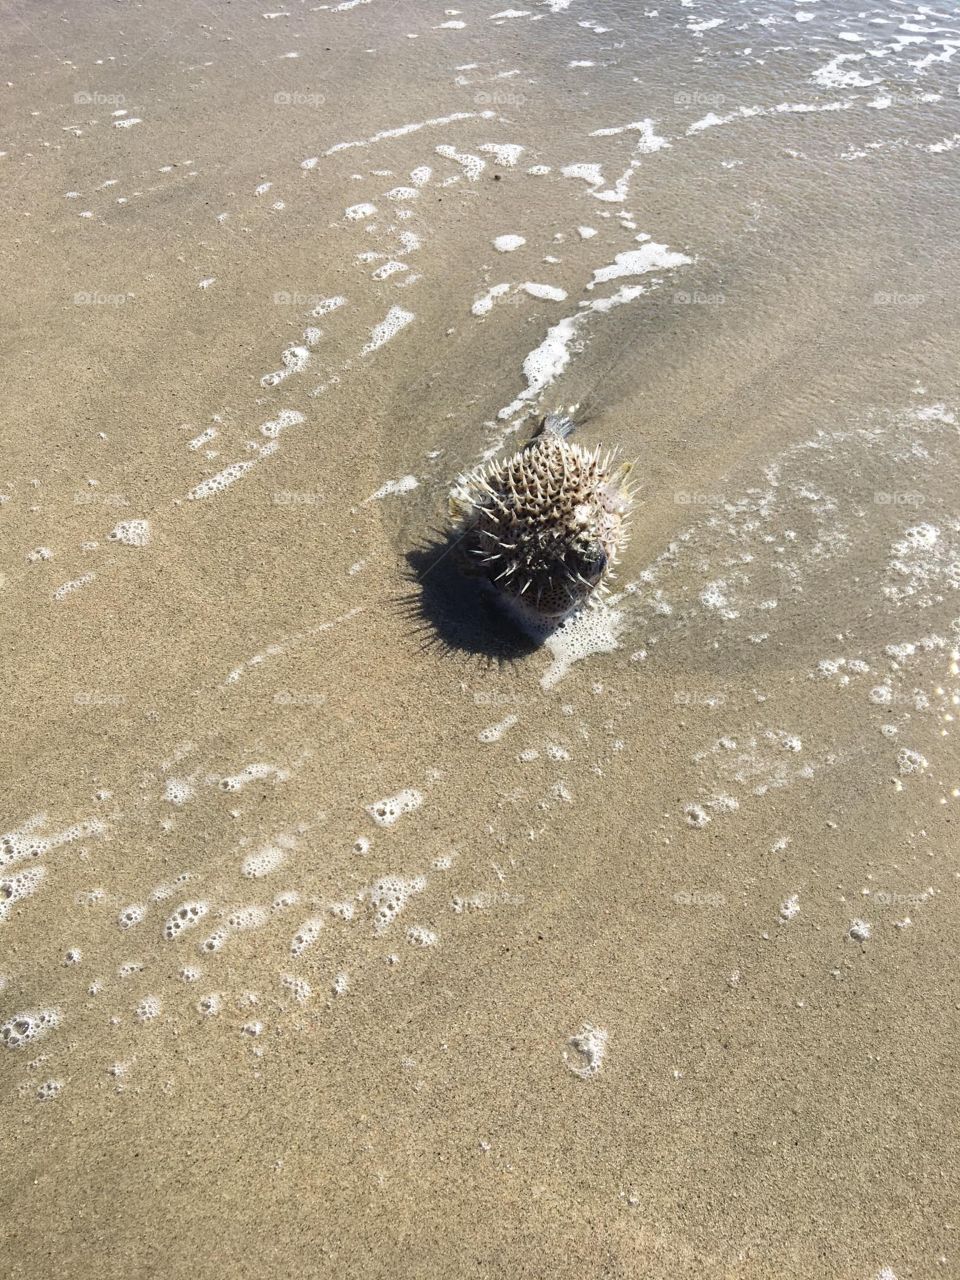 Sea urchin just chilling on the beach